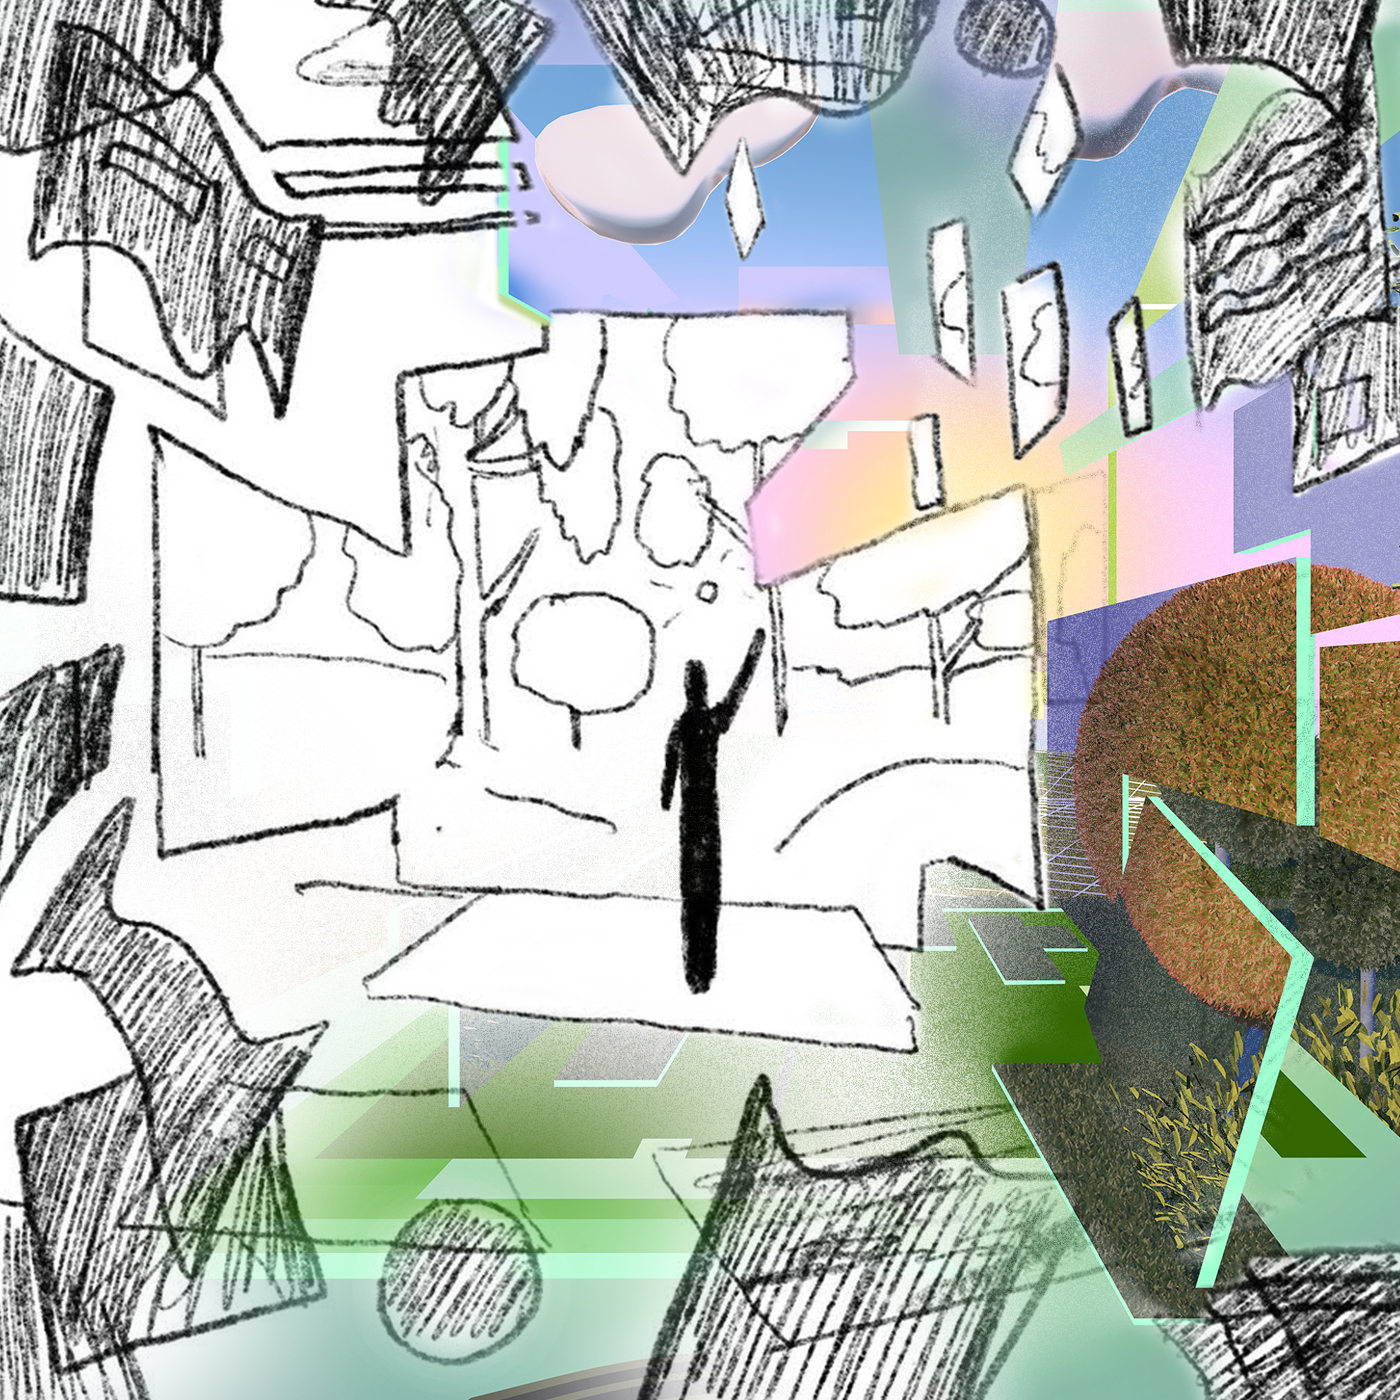 A sketch of objects representing work and communication in the foreground leading to a figure moving past them and looking out on a peaceful landscape.